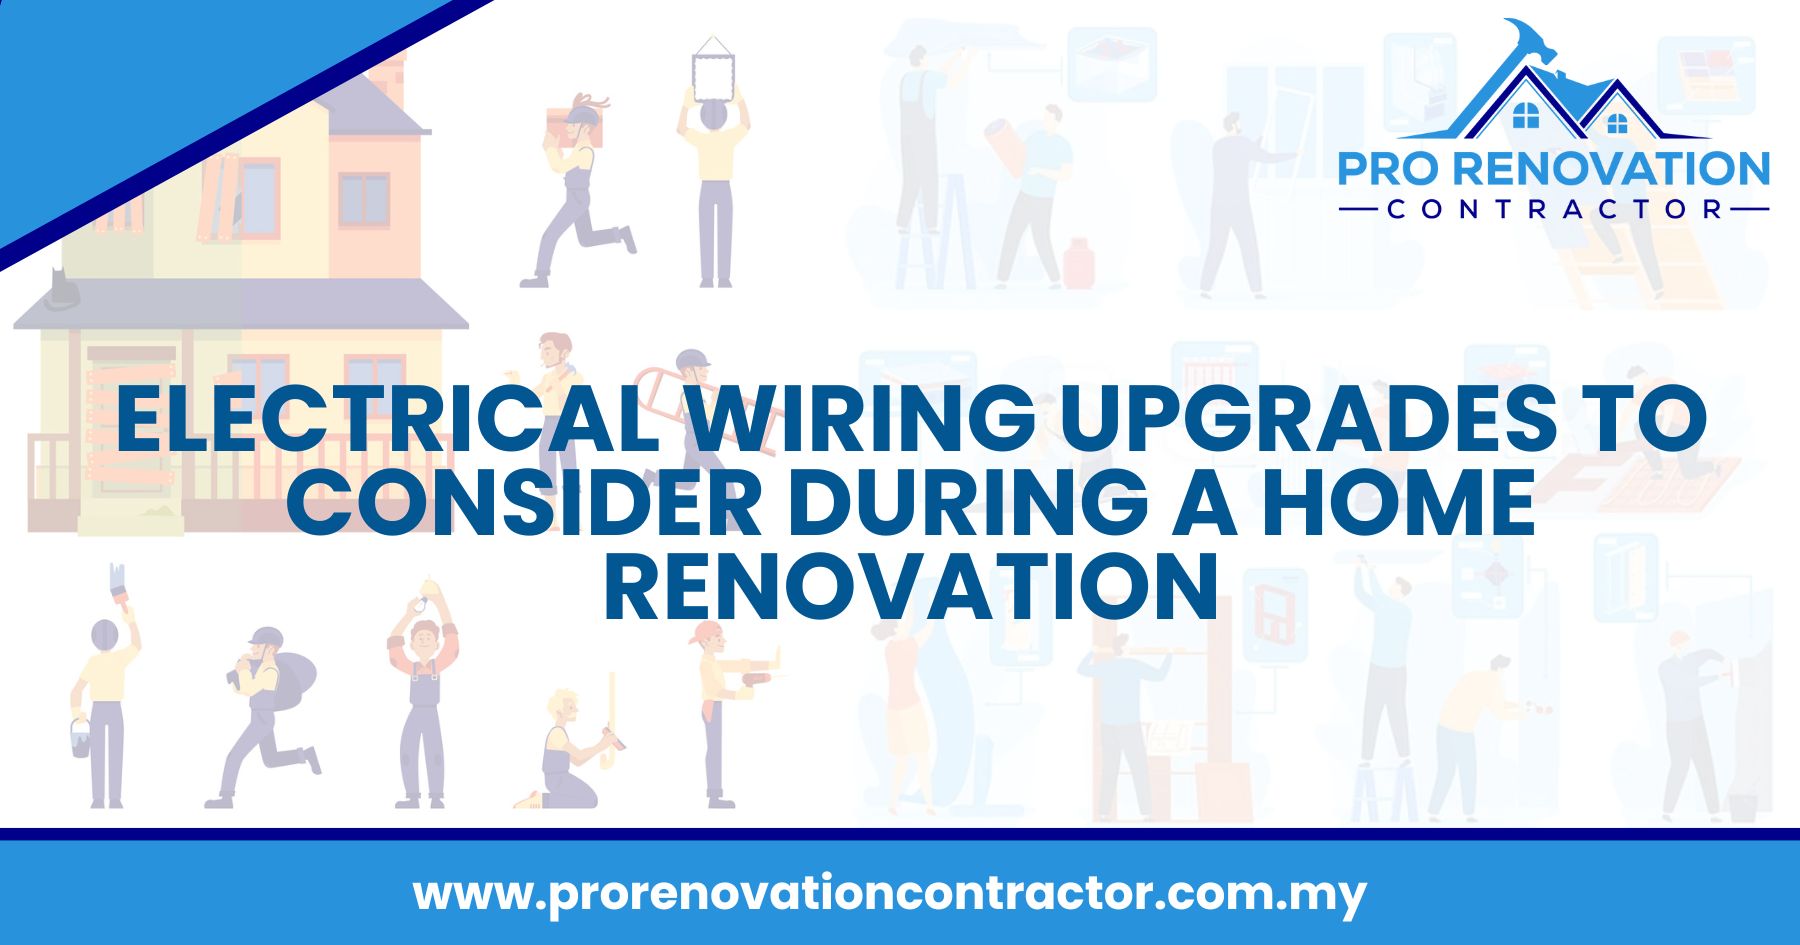 Electrical Wiring Upgrades to Consider During a Home Renovation